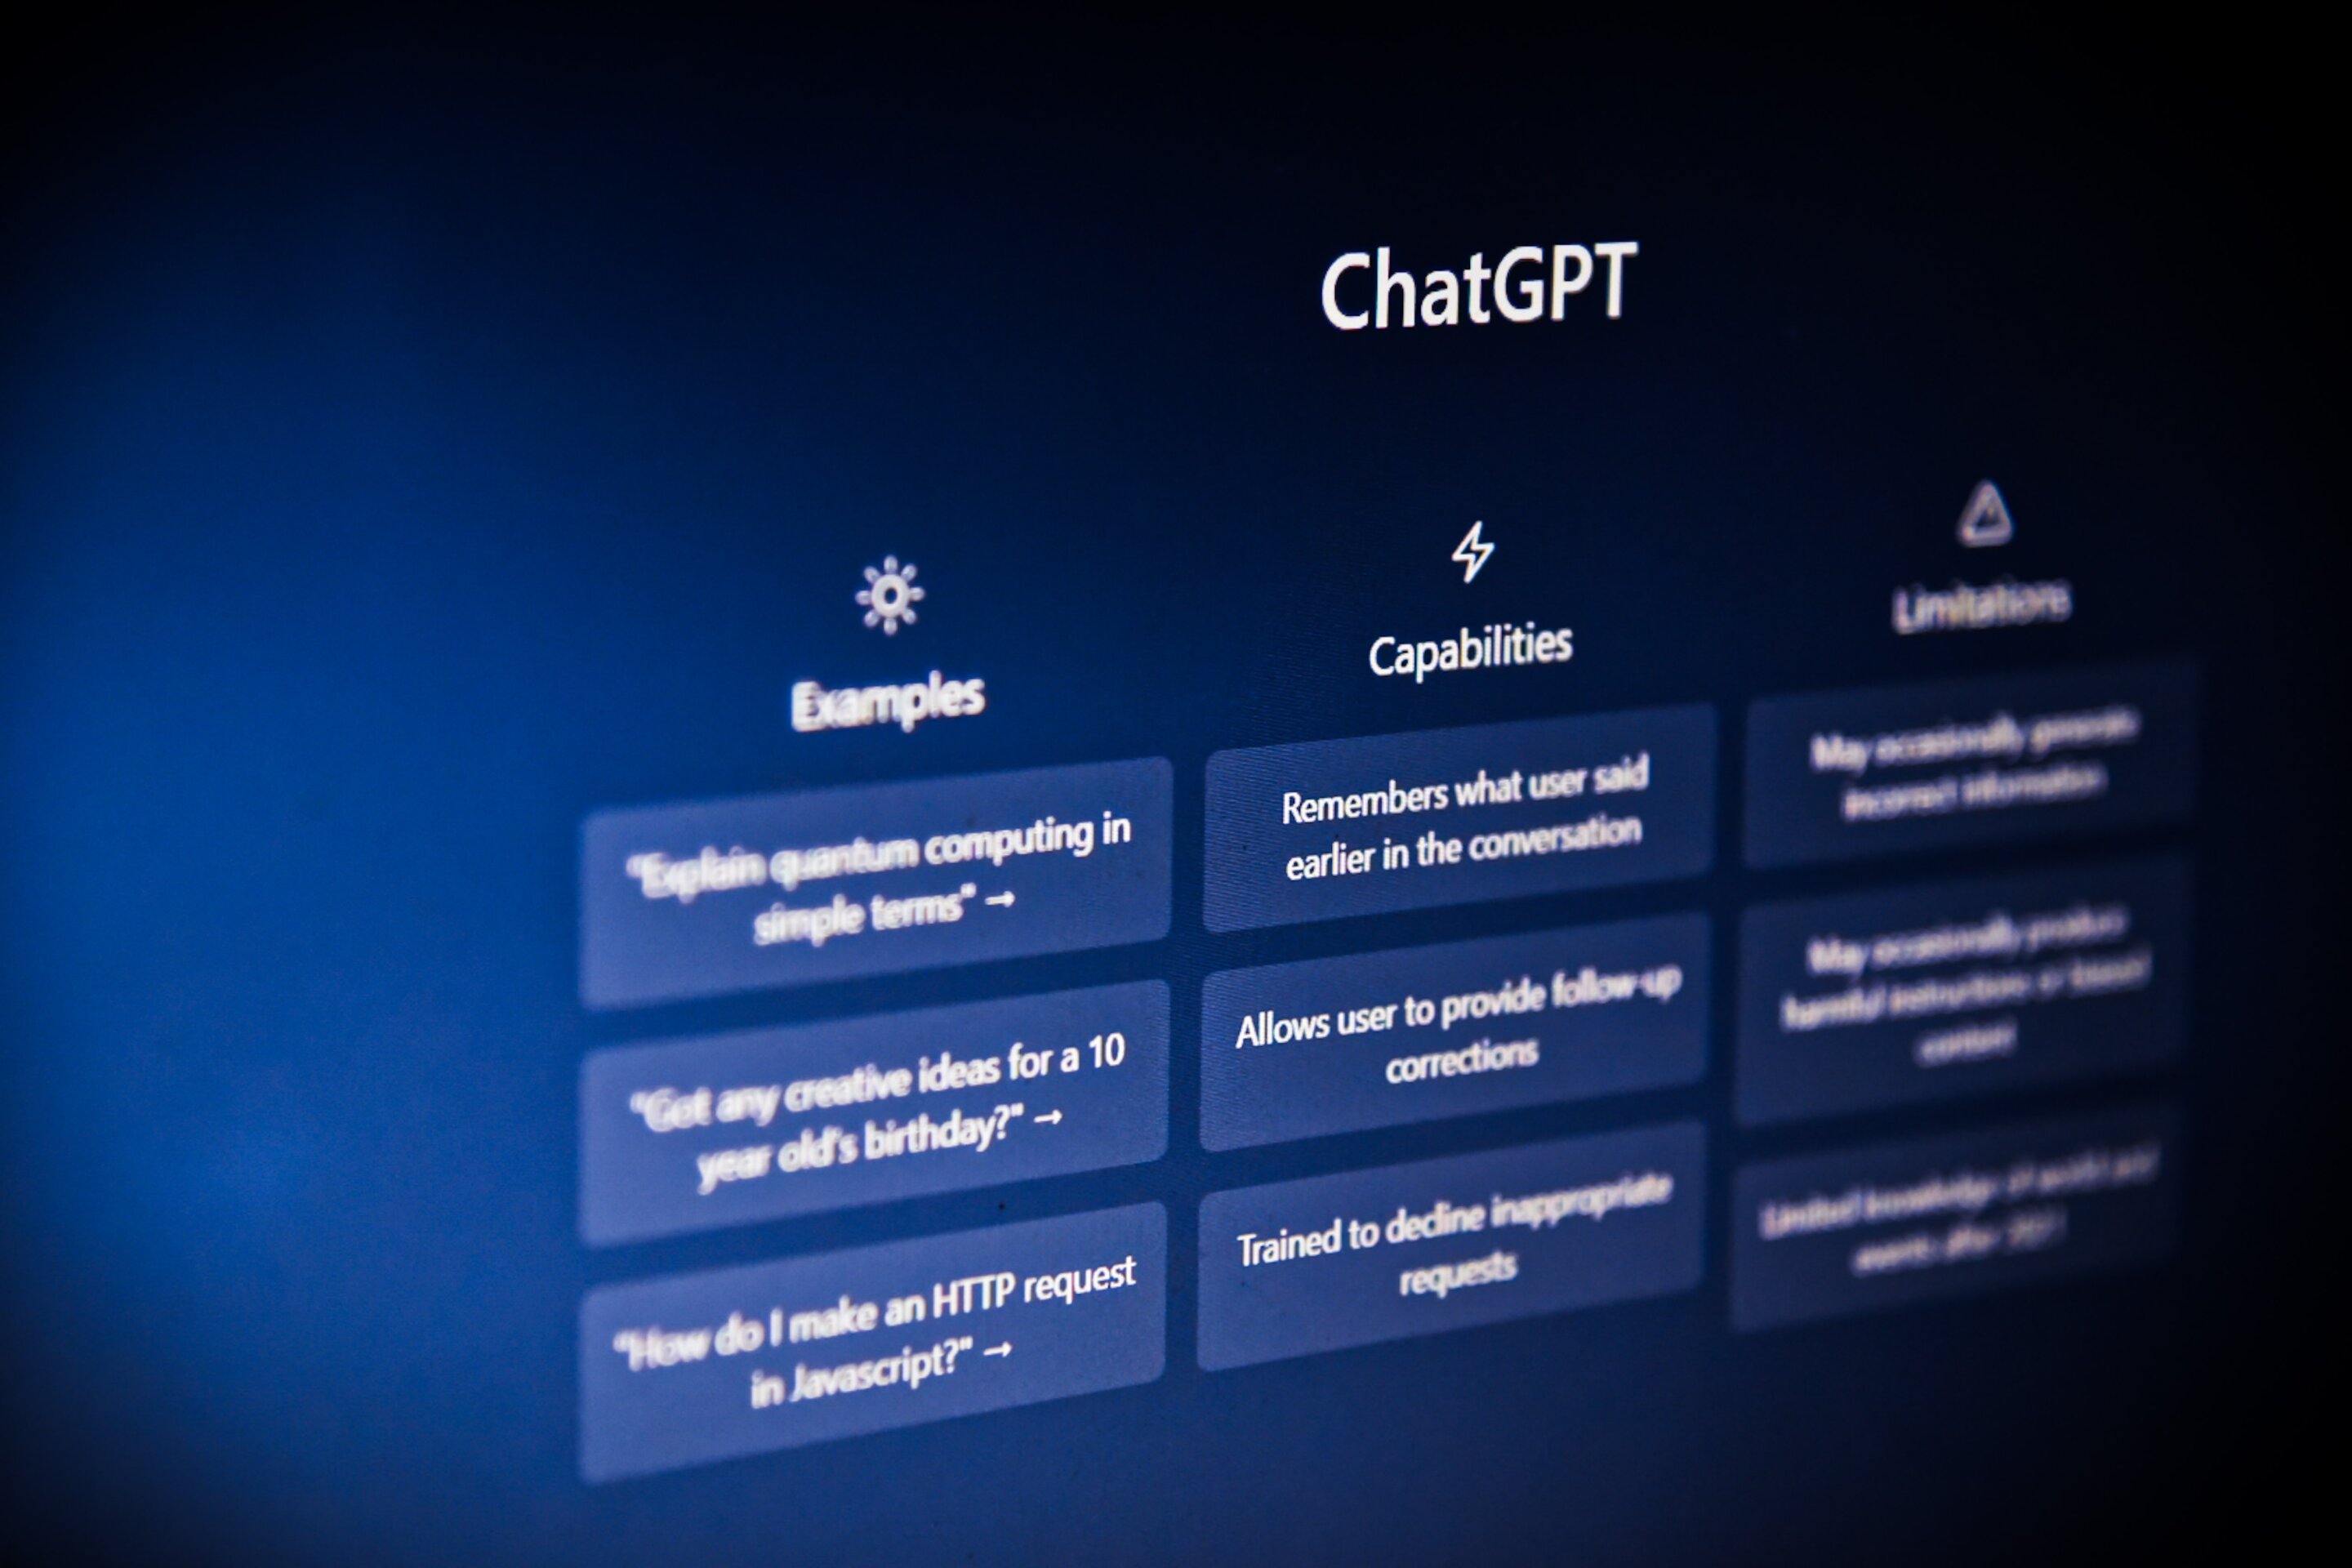 Three ways to use ChatGPT to help students learn—and not cheat